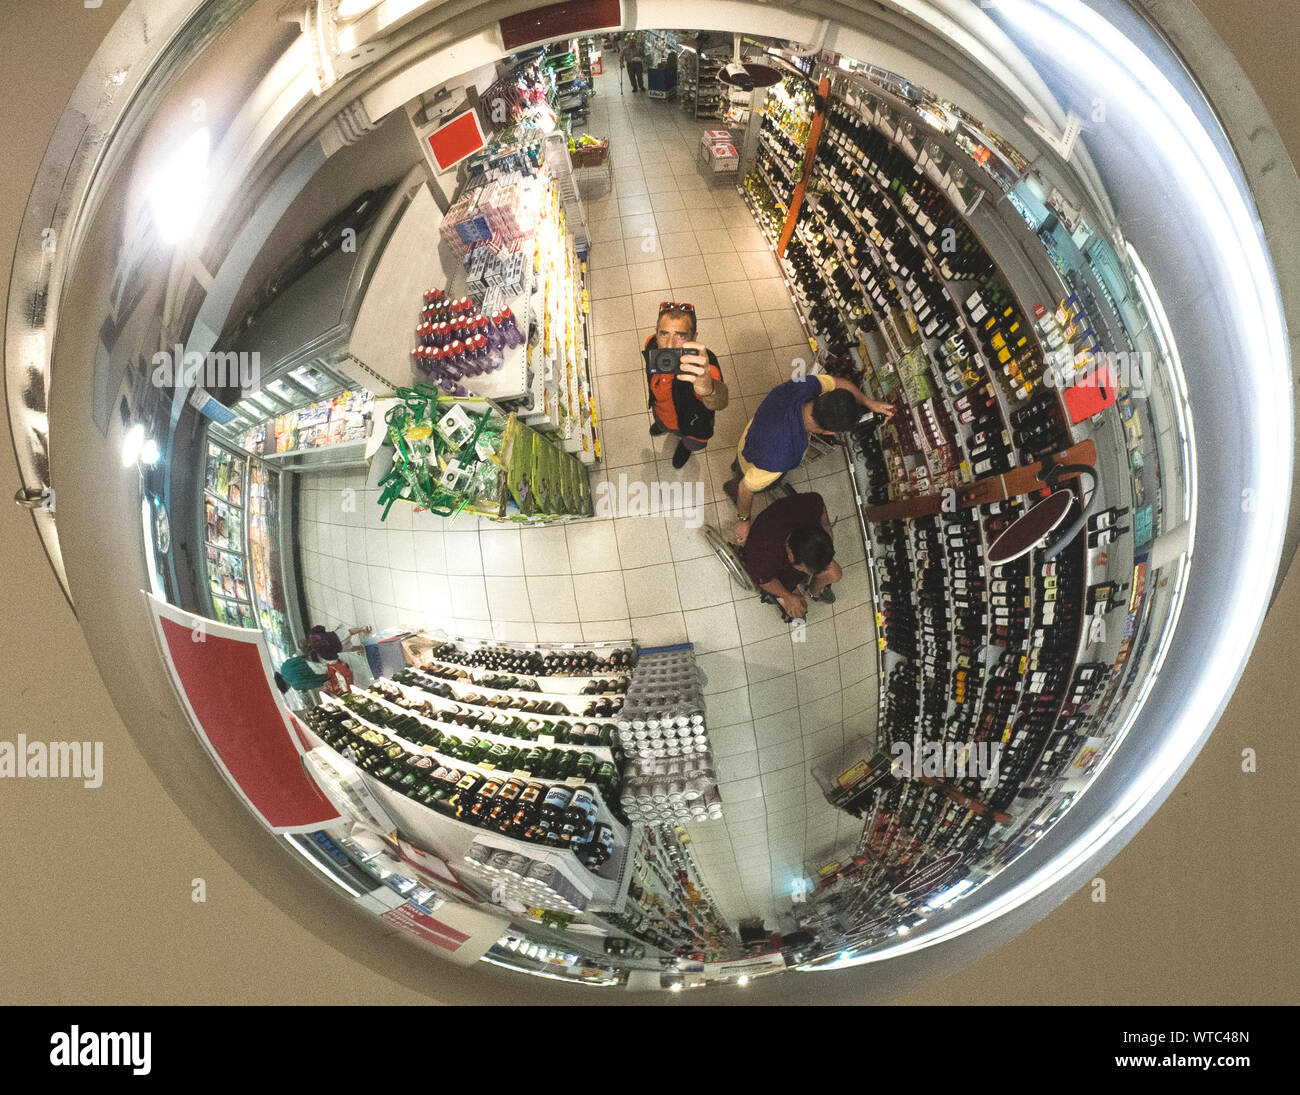 Reflection Of Man Photographing With Smart Phone In Super Market Stock Photo